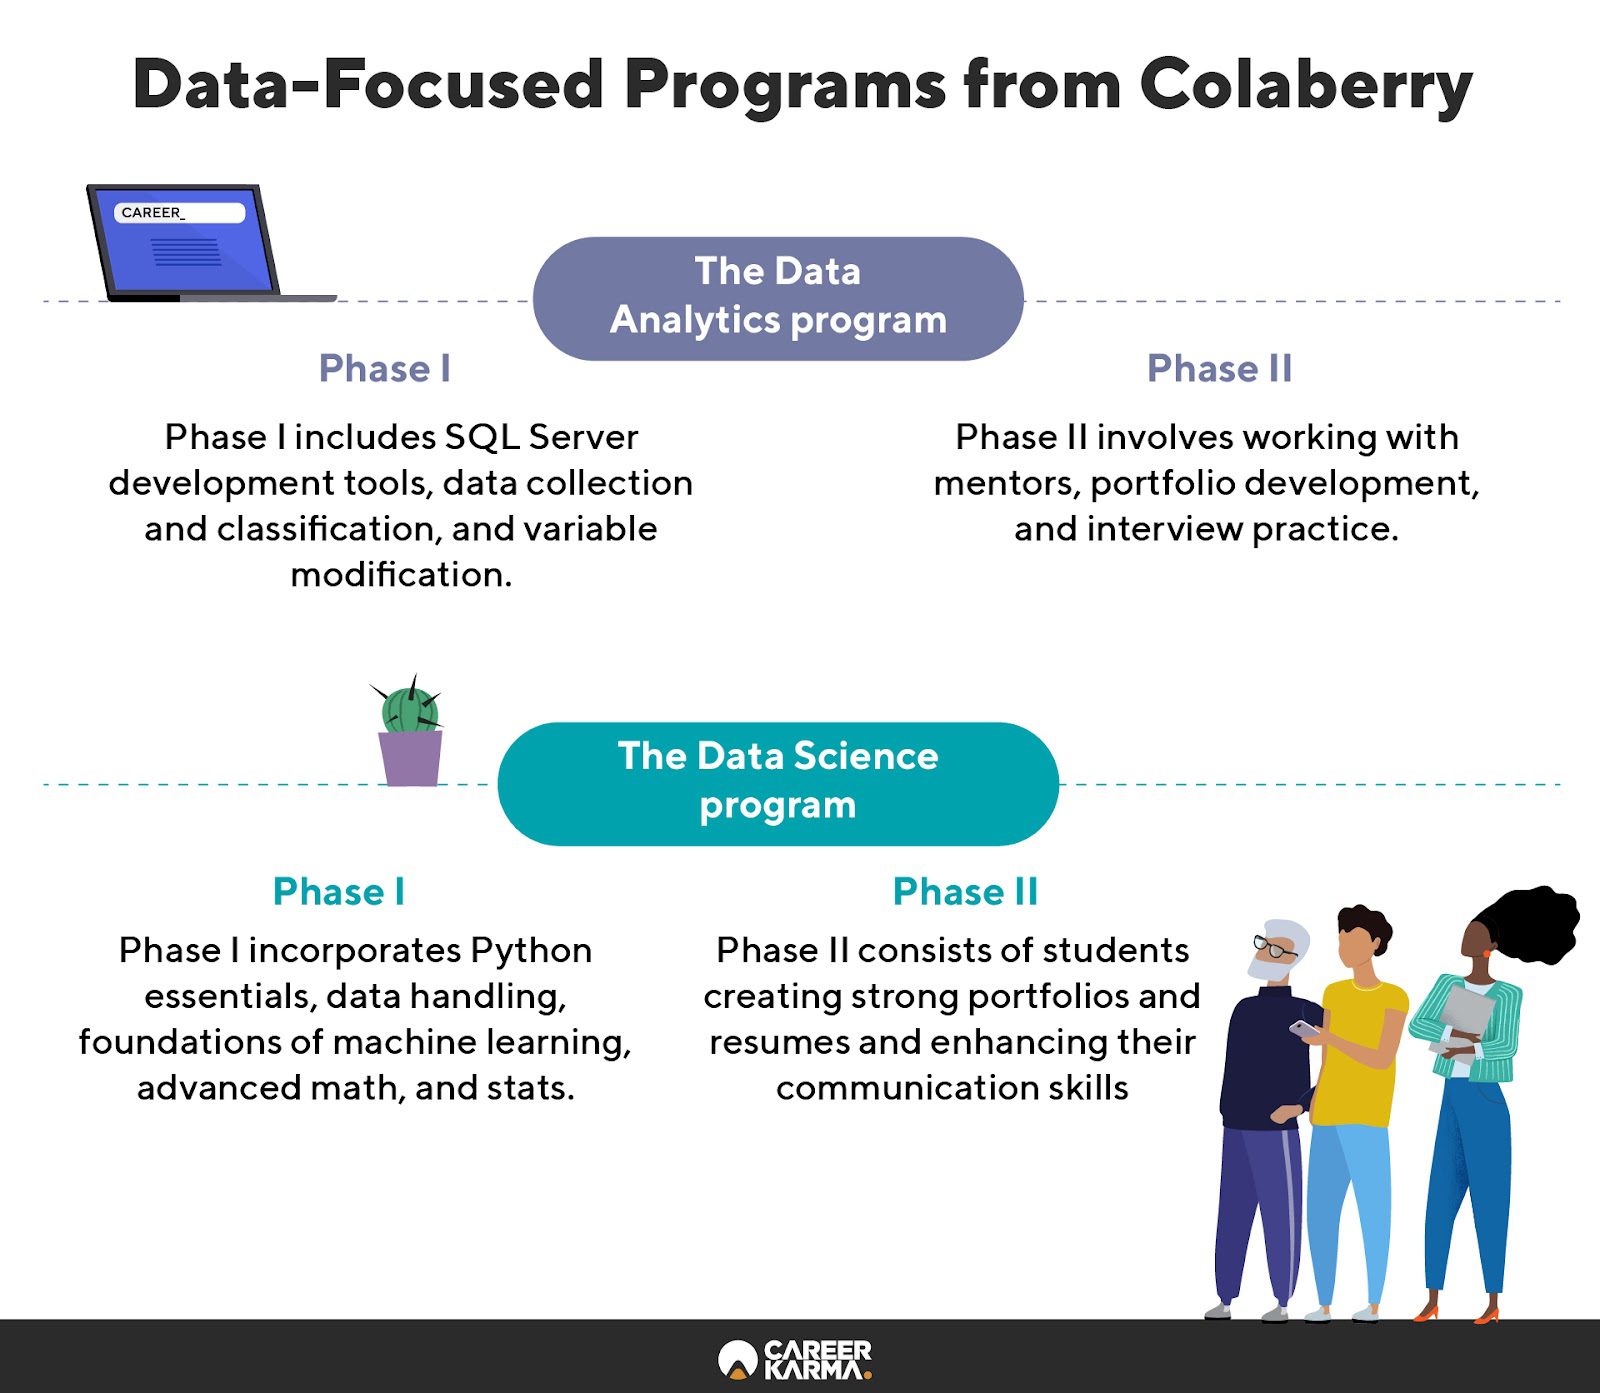 An infographic featuring an overview of Colaberry’s data-focused programs